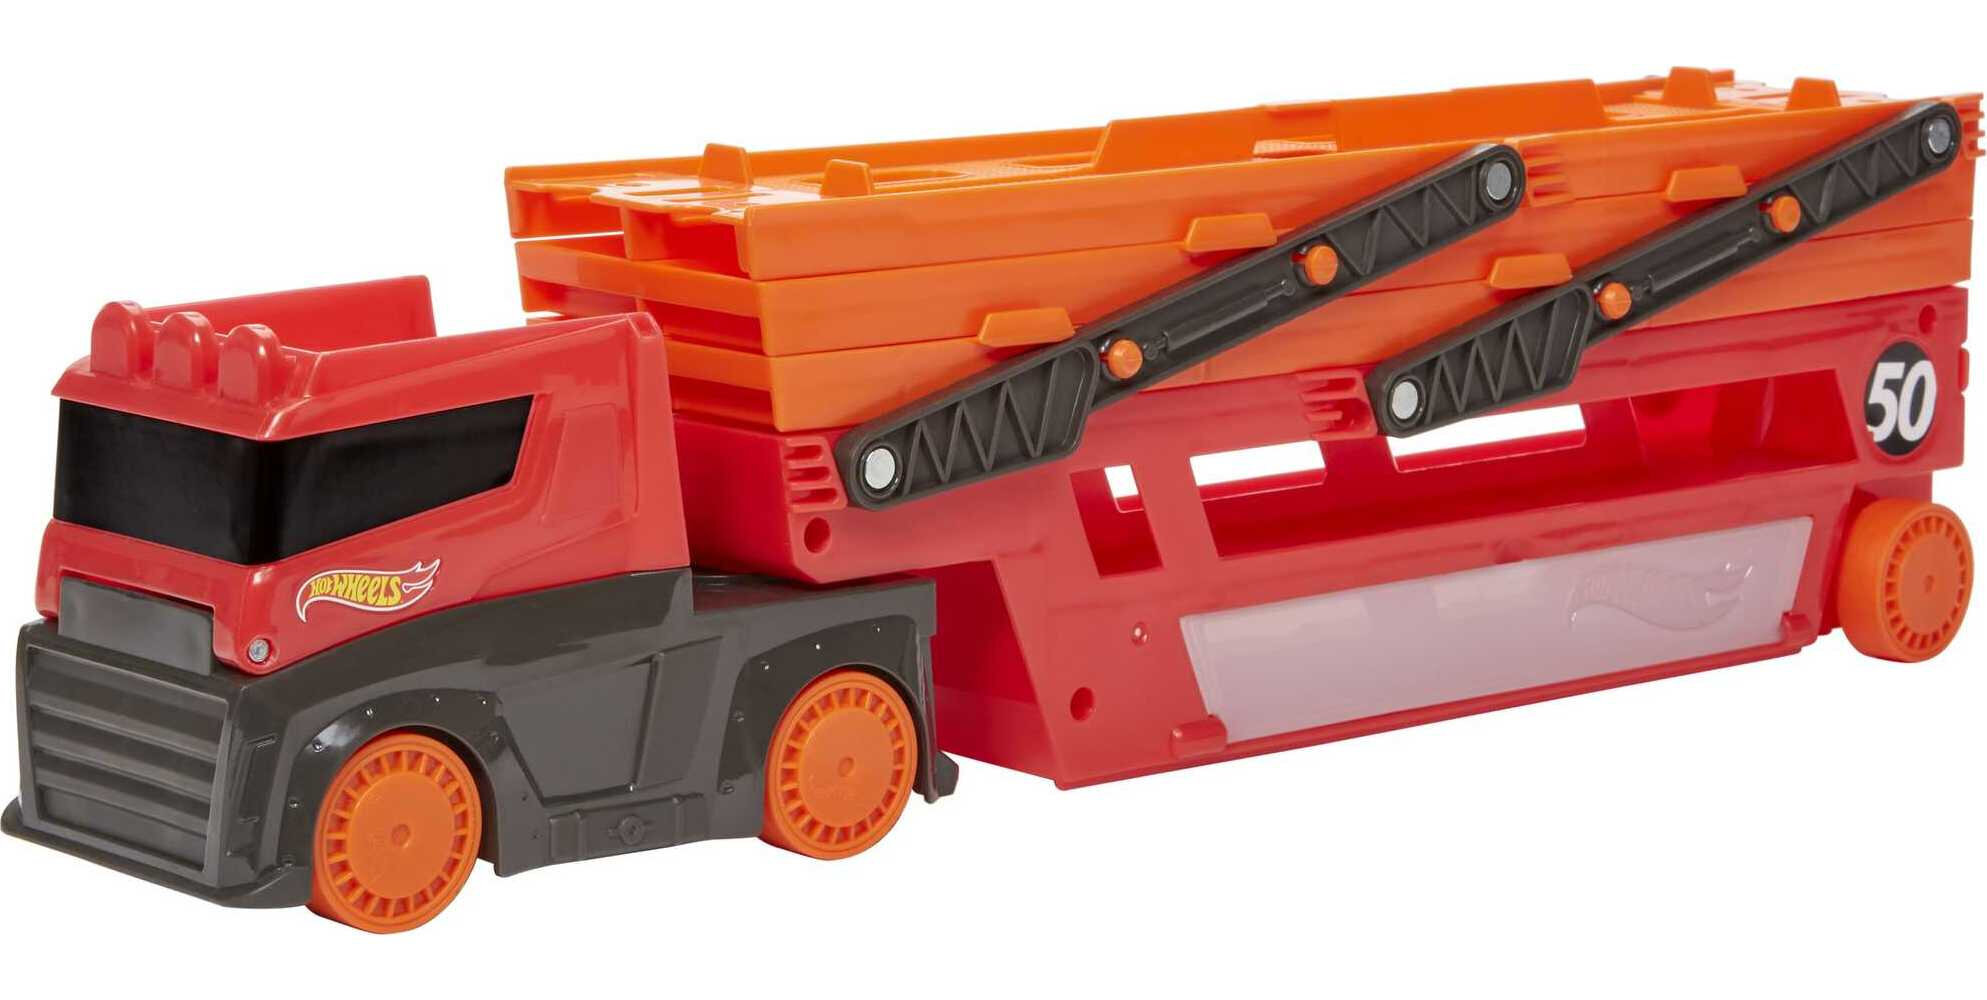 Hot Wheels Mega Hauler with 6 Expandable Levels, Stores up to 50 1:64 Scale Toy Vehicles - image 1 of 7